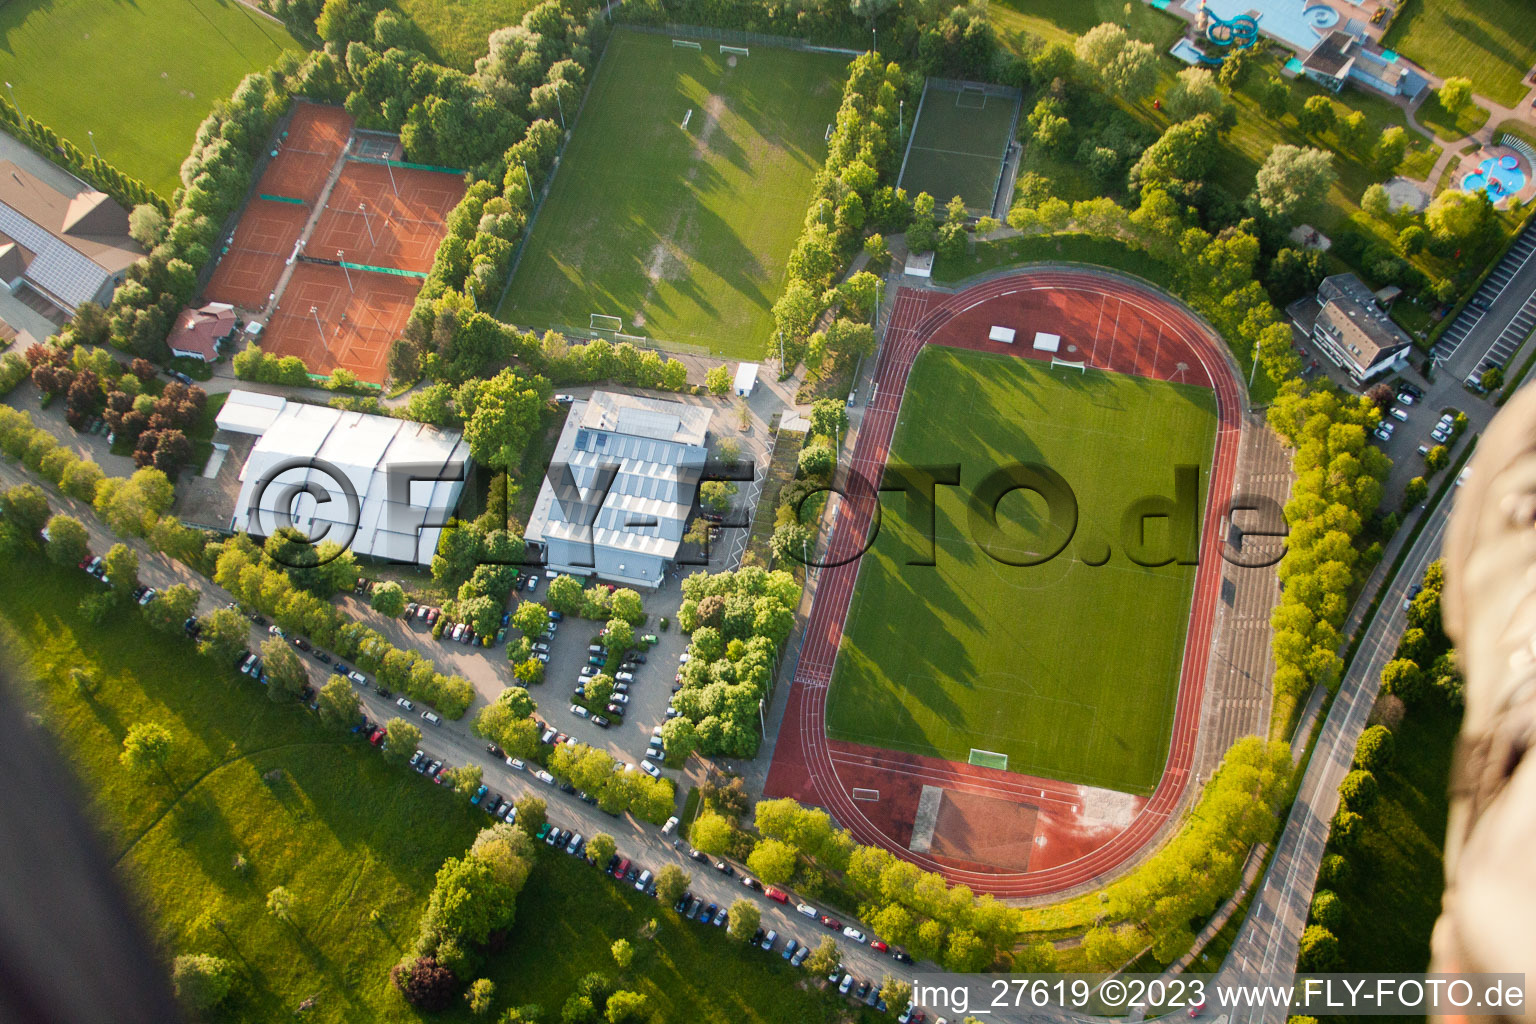 Reichenbach, tennis club Waldbronn e. v in the district Busenbach in Waldbronn in the state Baden-Wuerttemberg, Germany from above